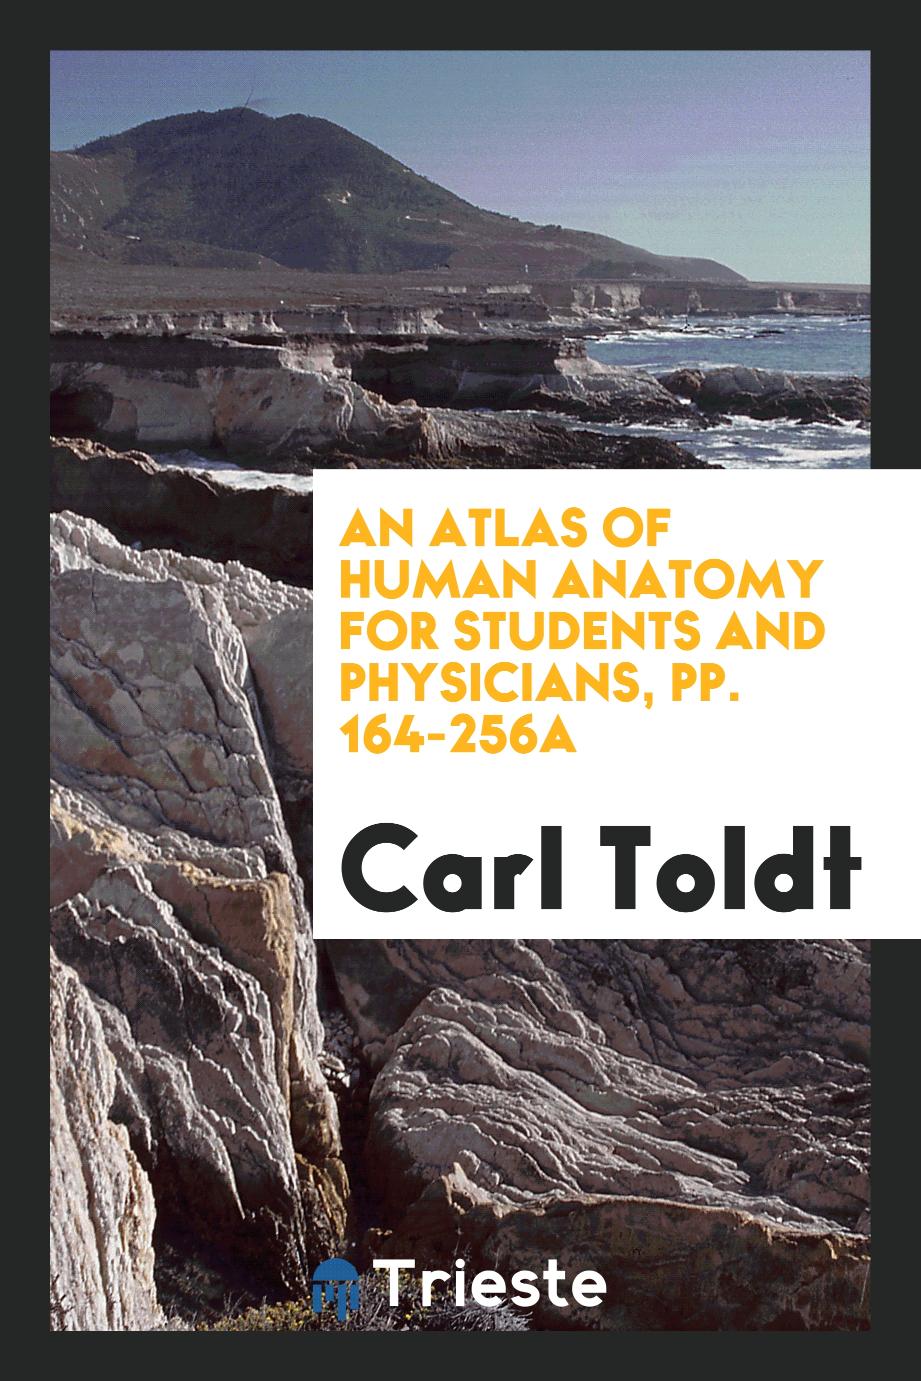 An Atlas of Human Anatomy for Students and Physicians, pp. 164-256a